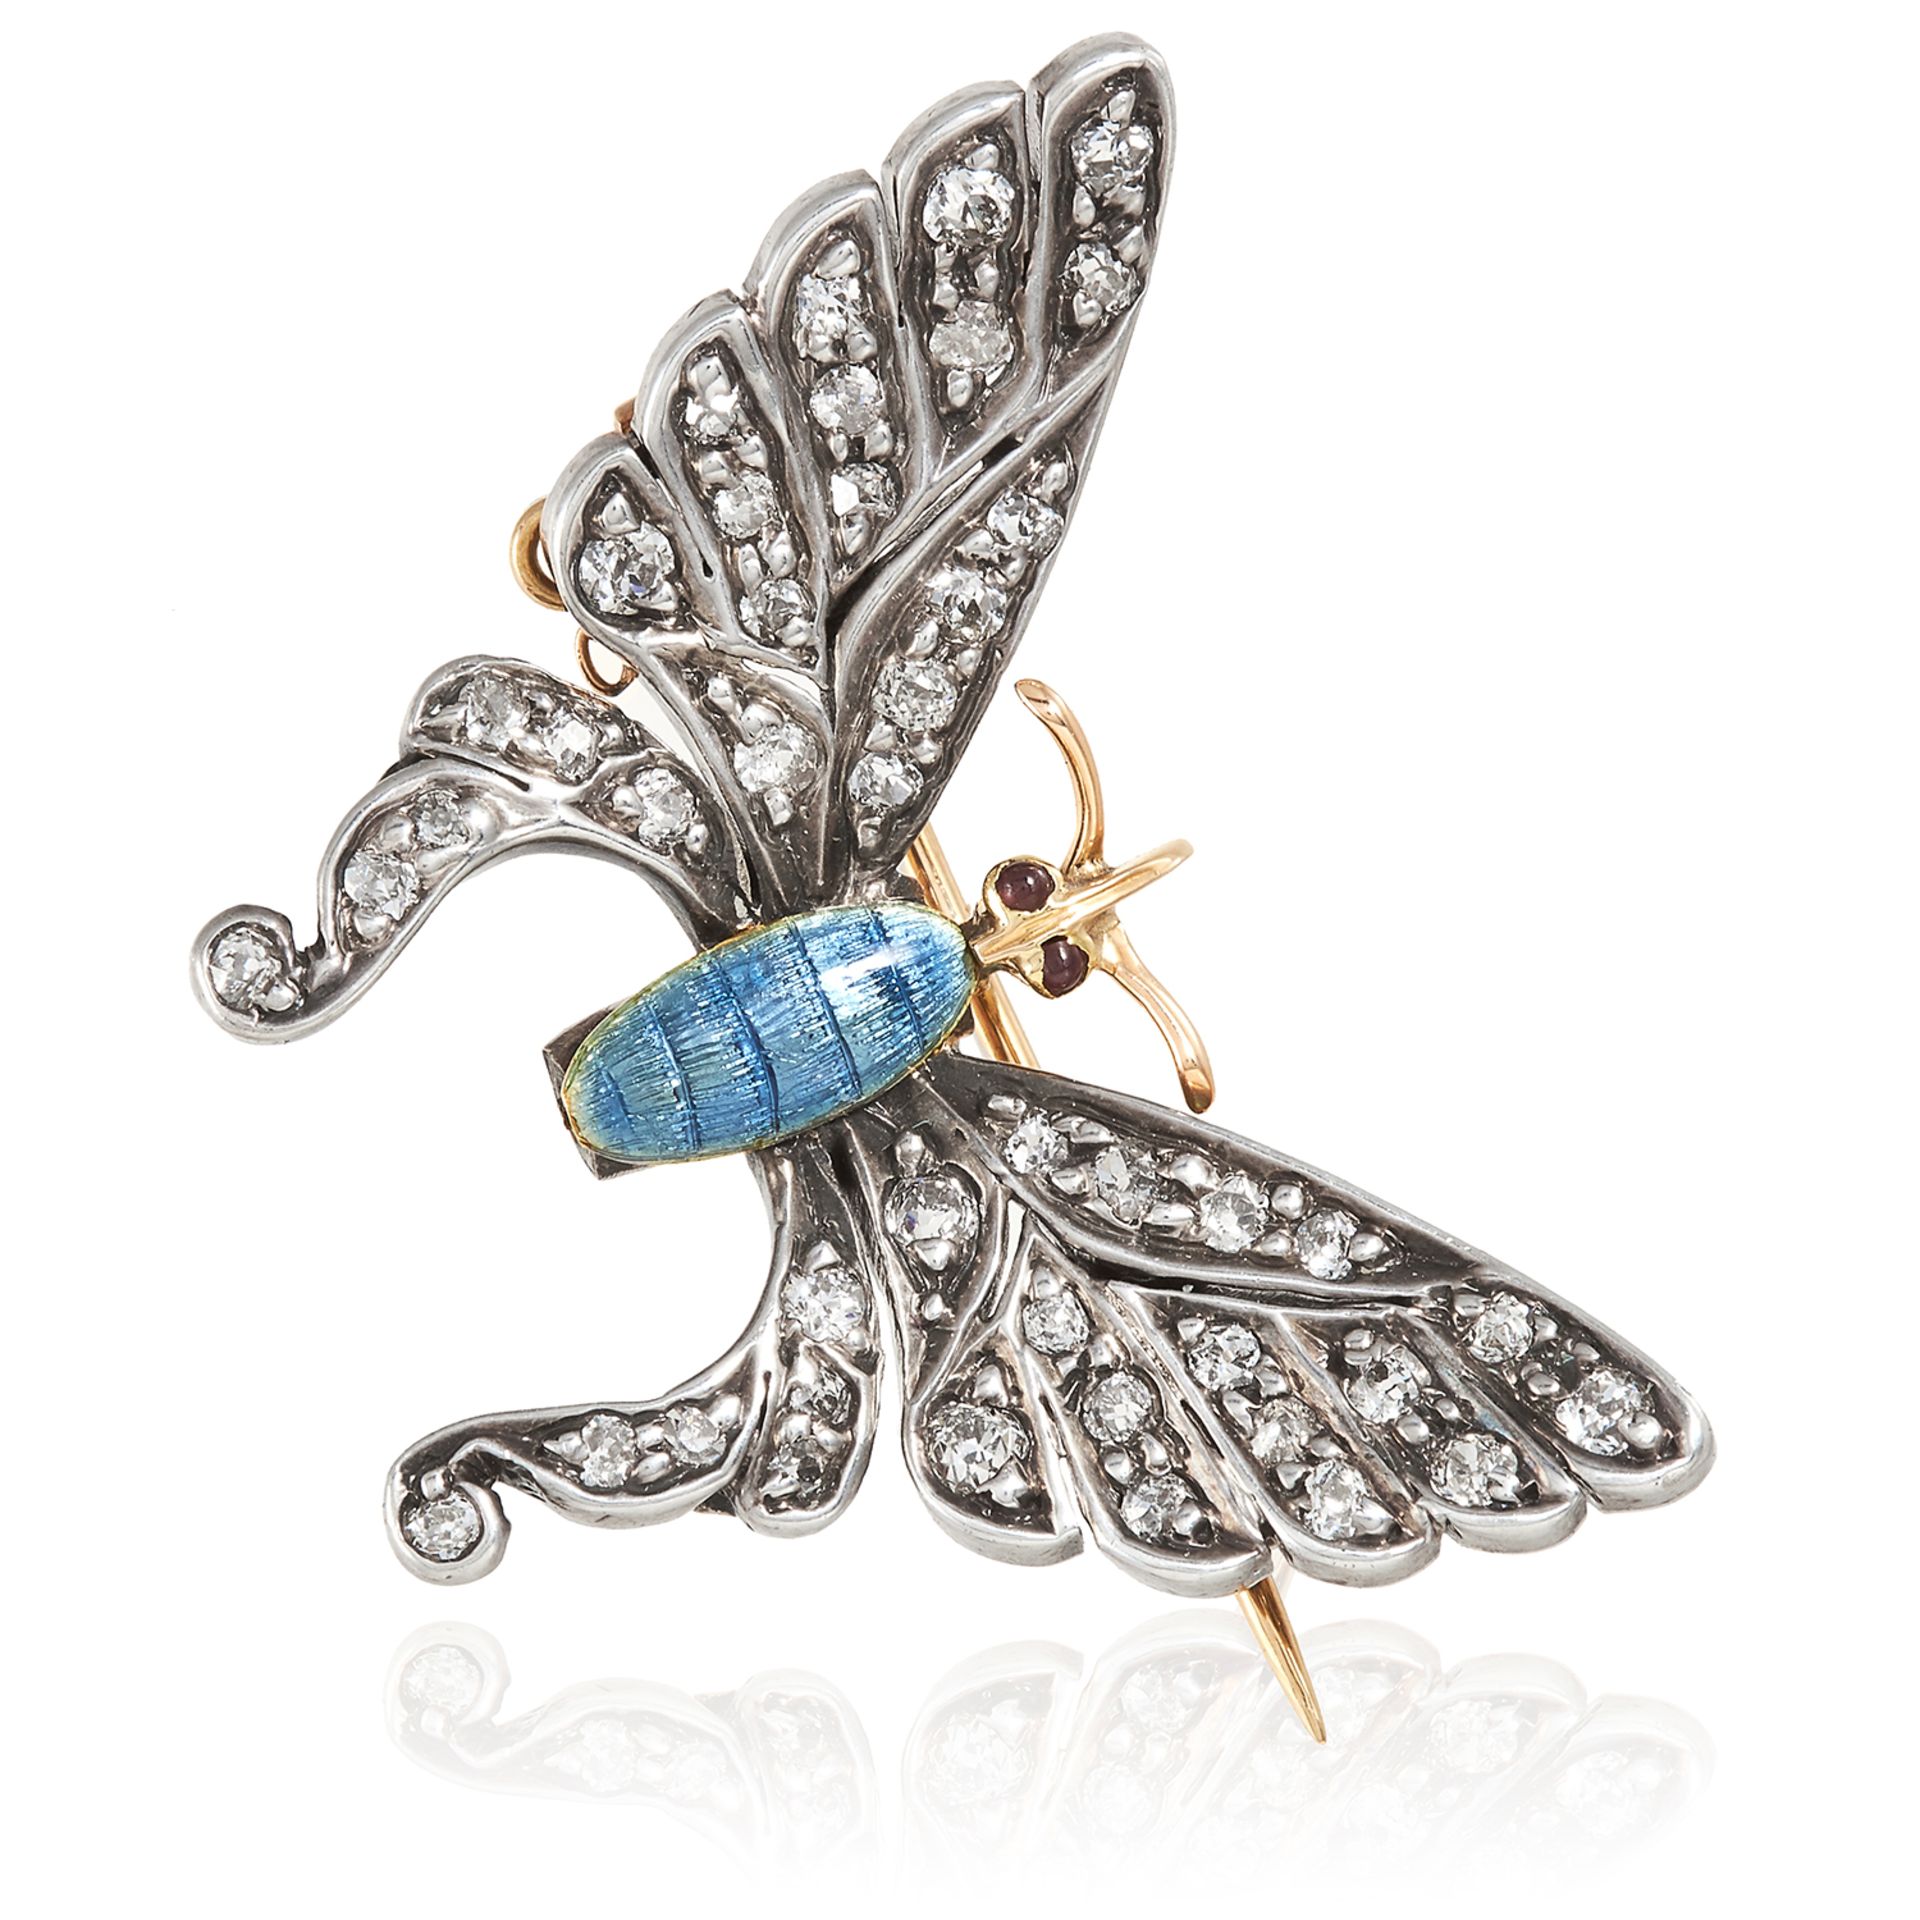 AN ANTIQUE DIAMOND AND ENAMEL BUTTERFLY BROOCH in yellow gold and silver, designed as butterfly, its